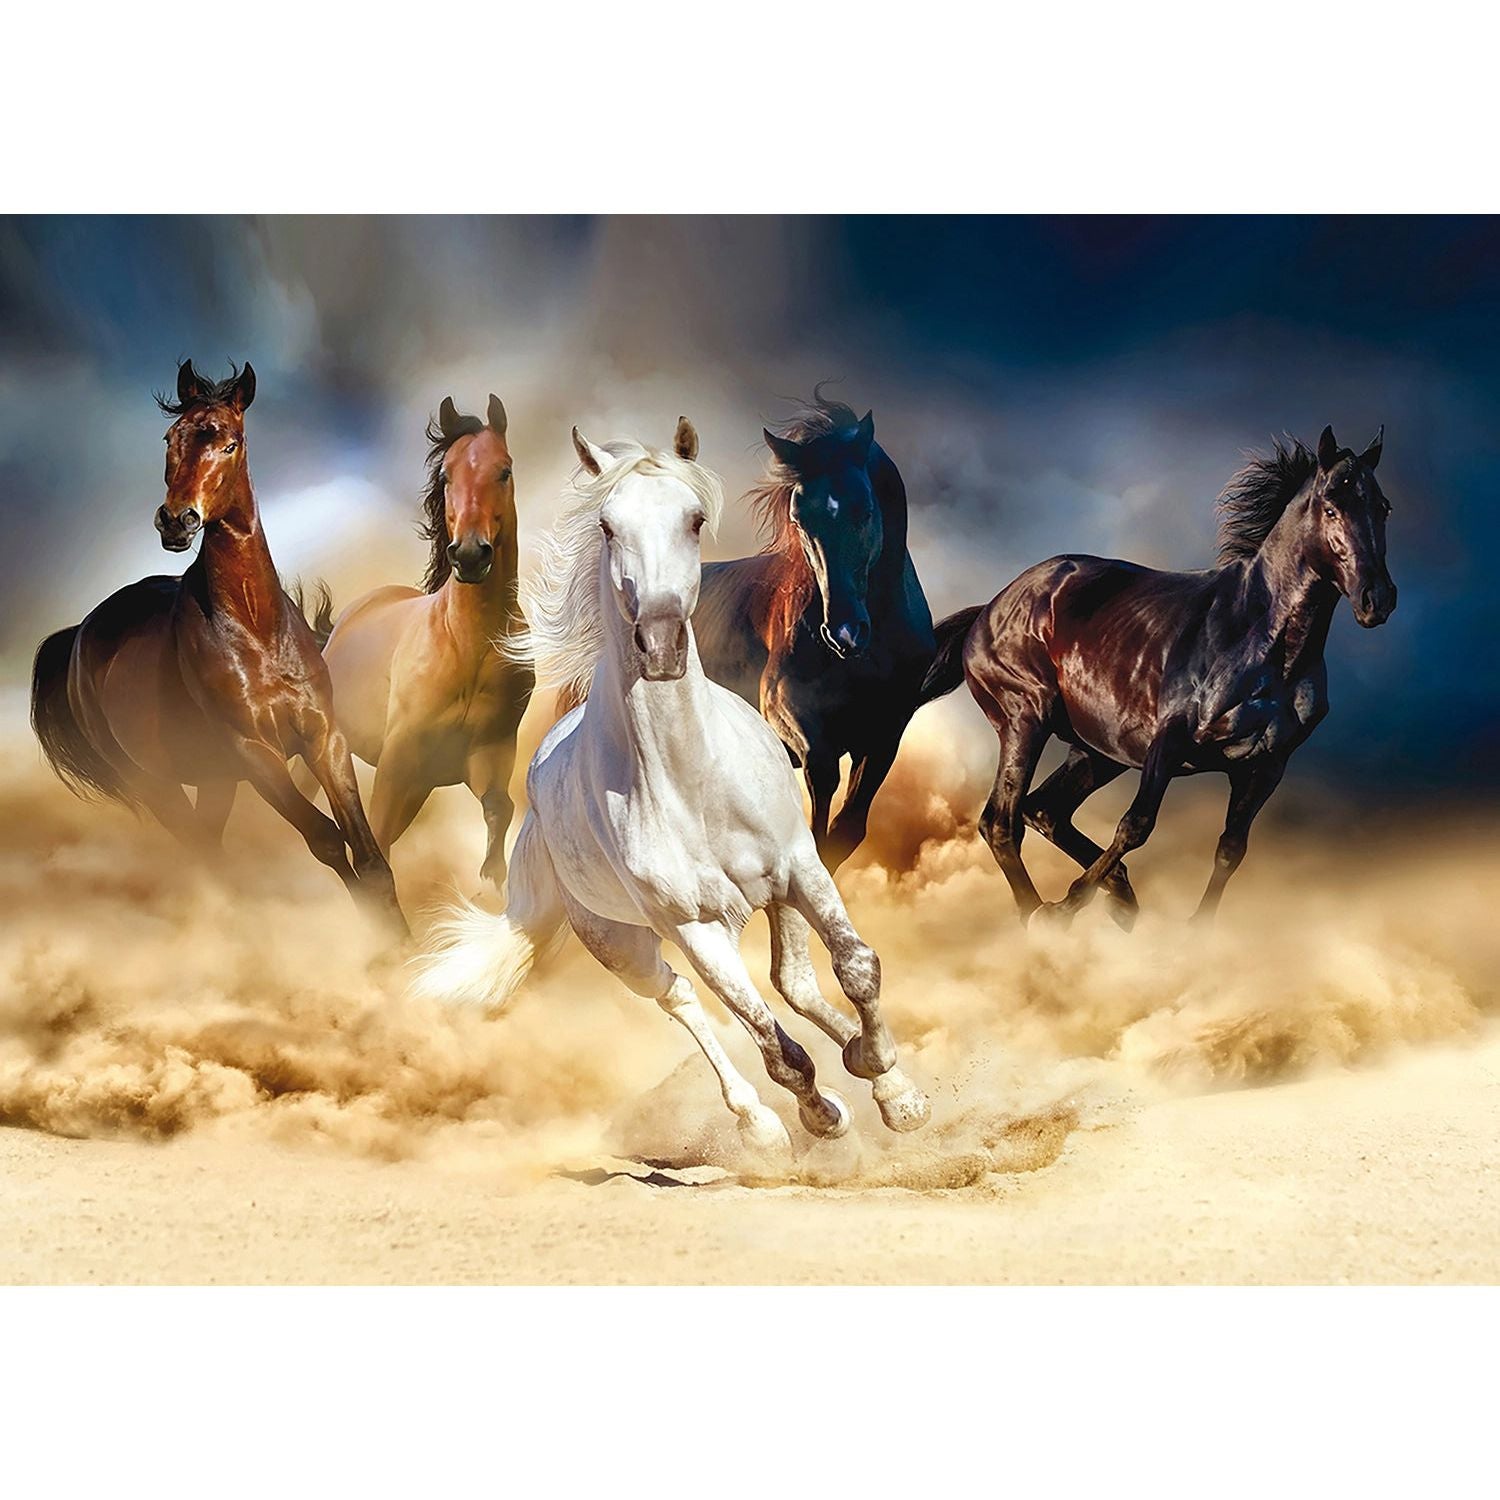 Wild Sprint: The Freedom of Horses Wall Mural